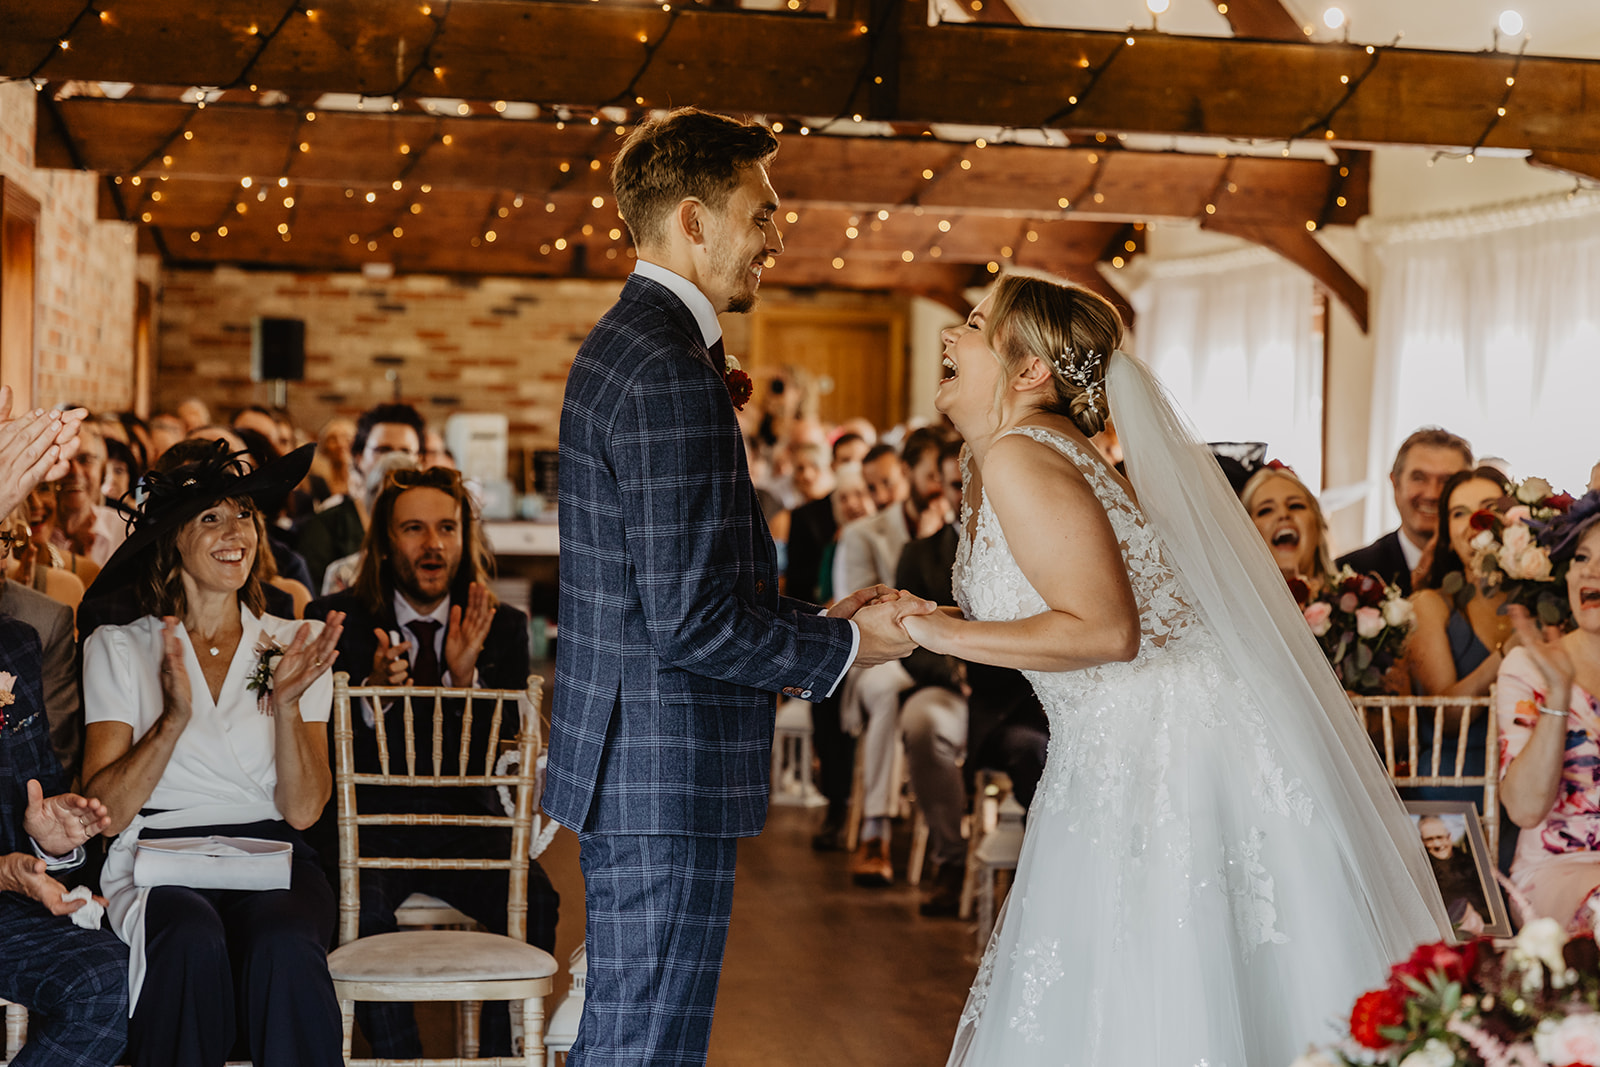 Bride and groom exchange vows at a wedding at Long Furlong Barn, Sussex. By OliveJoy Photography.